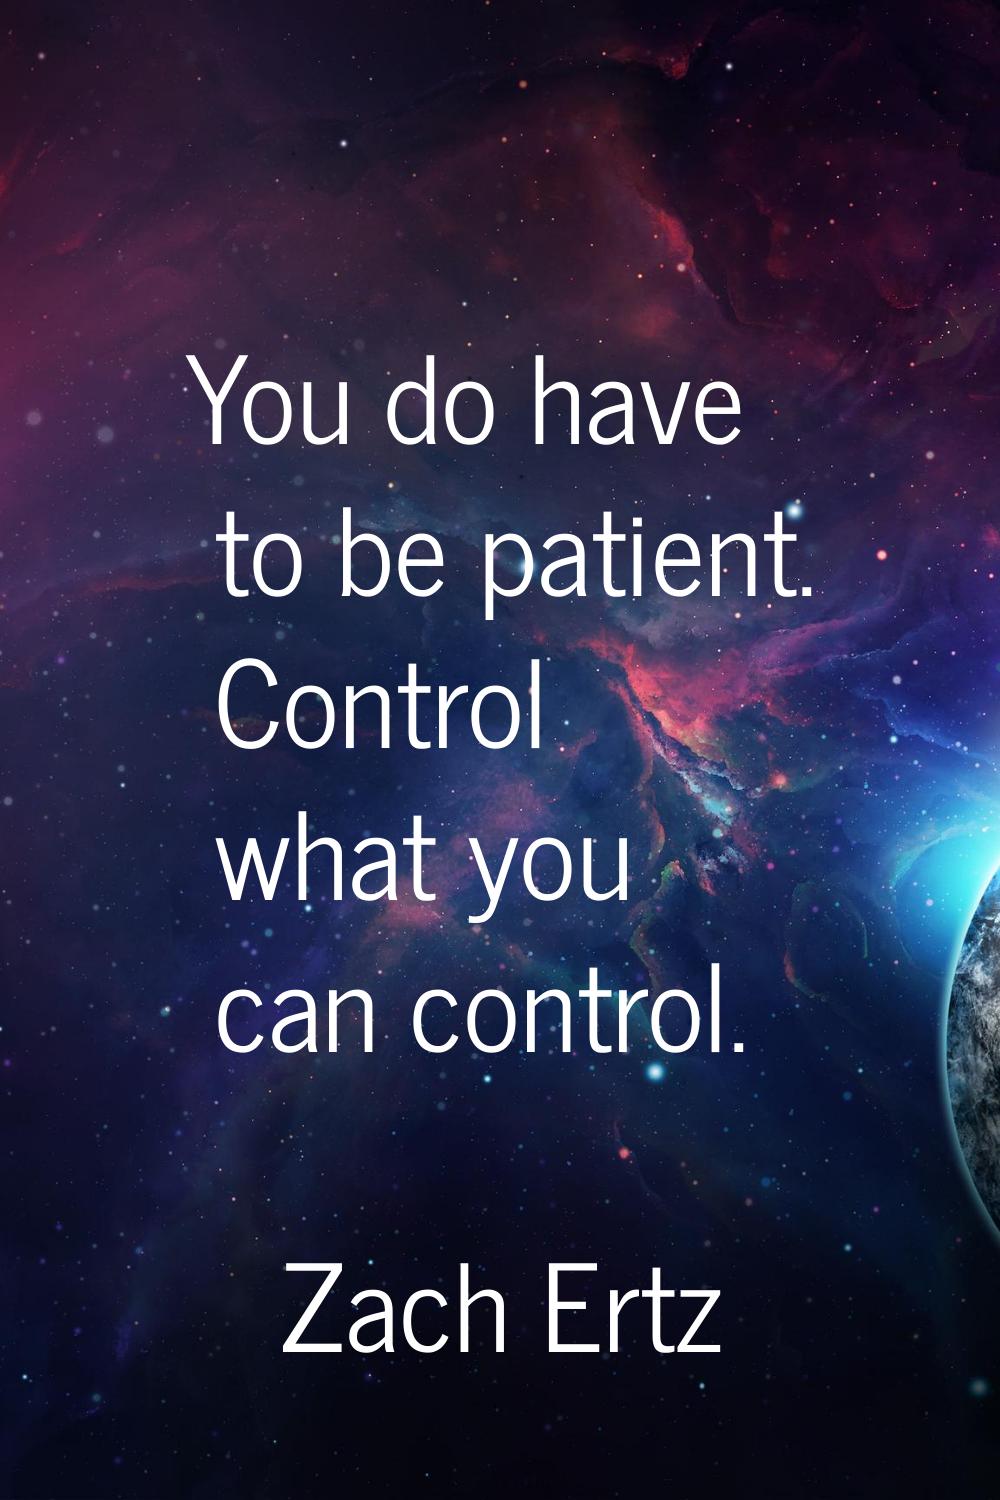 You do have to be patient. Control what you can control.